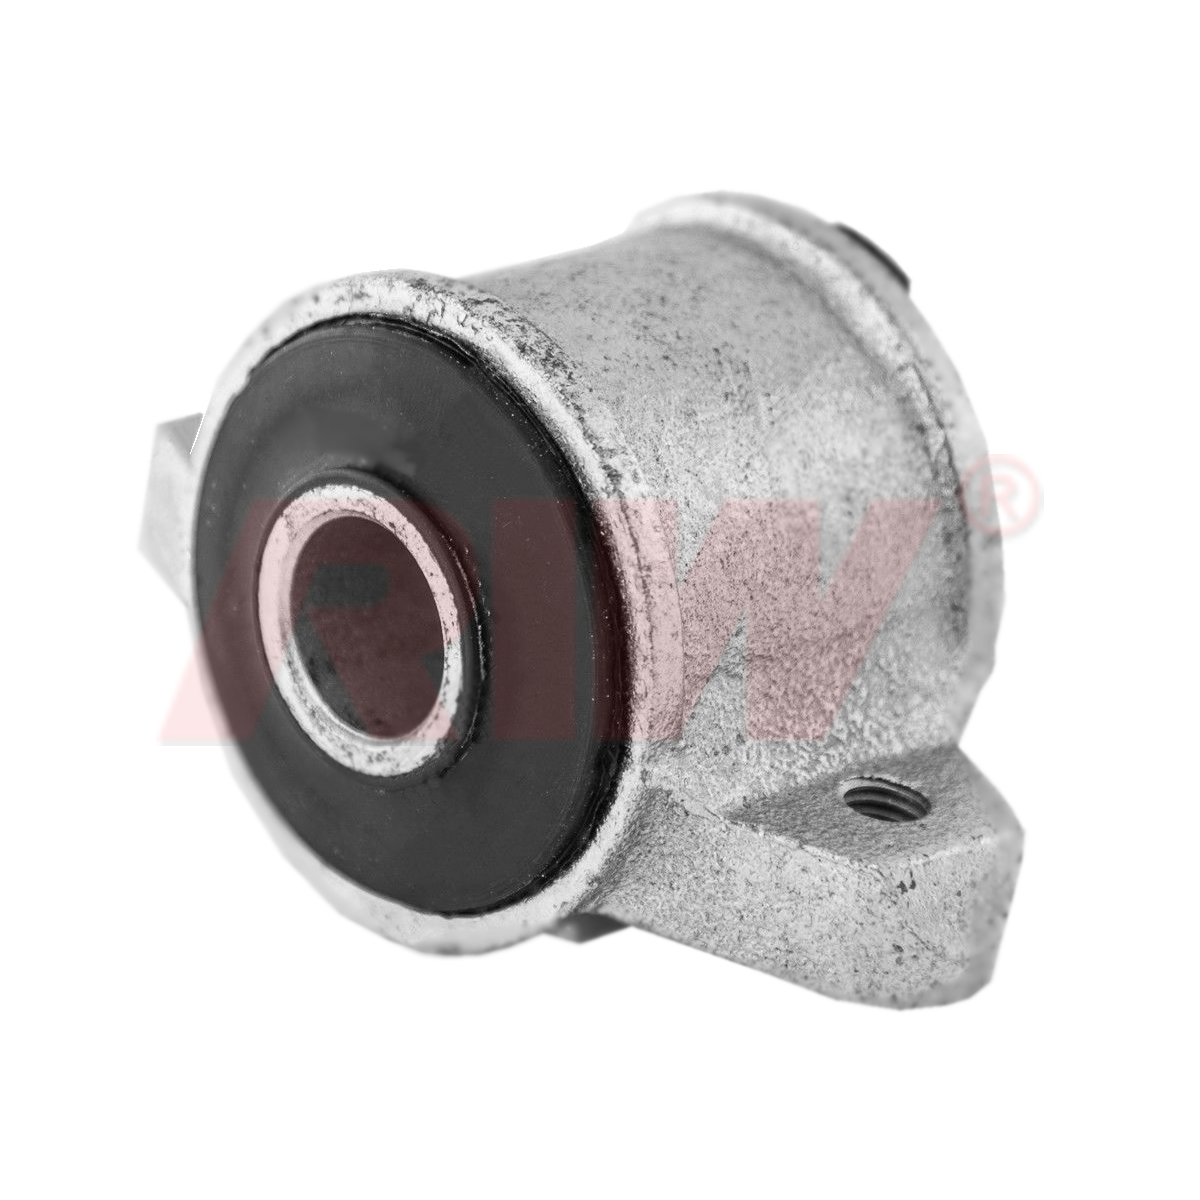 RENAULT MASTER (I FD, JD, ND) 1998 - 2003 Axle Support Bushing